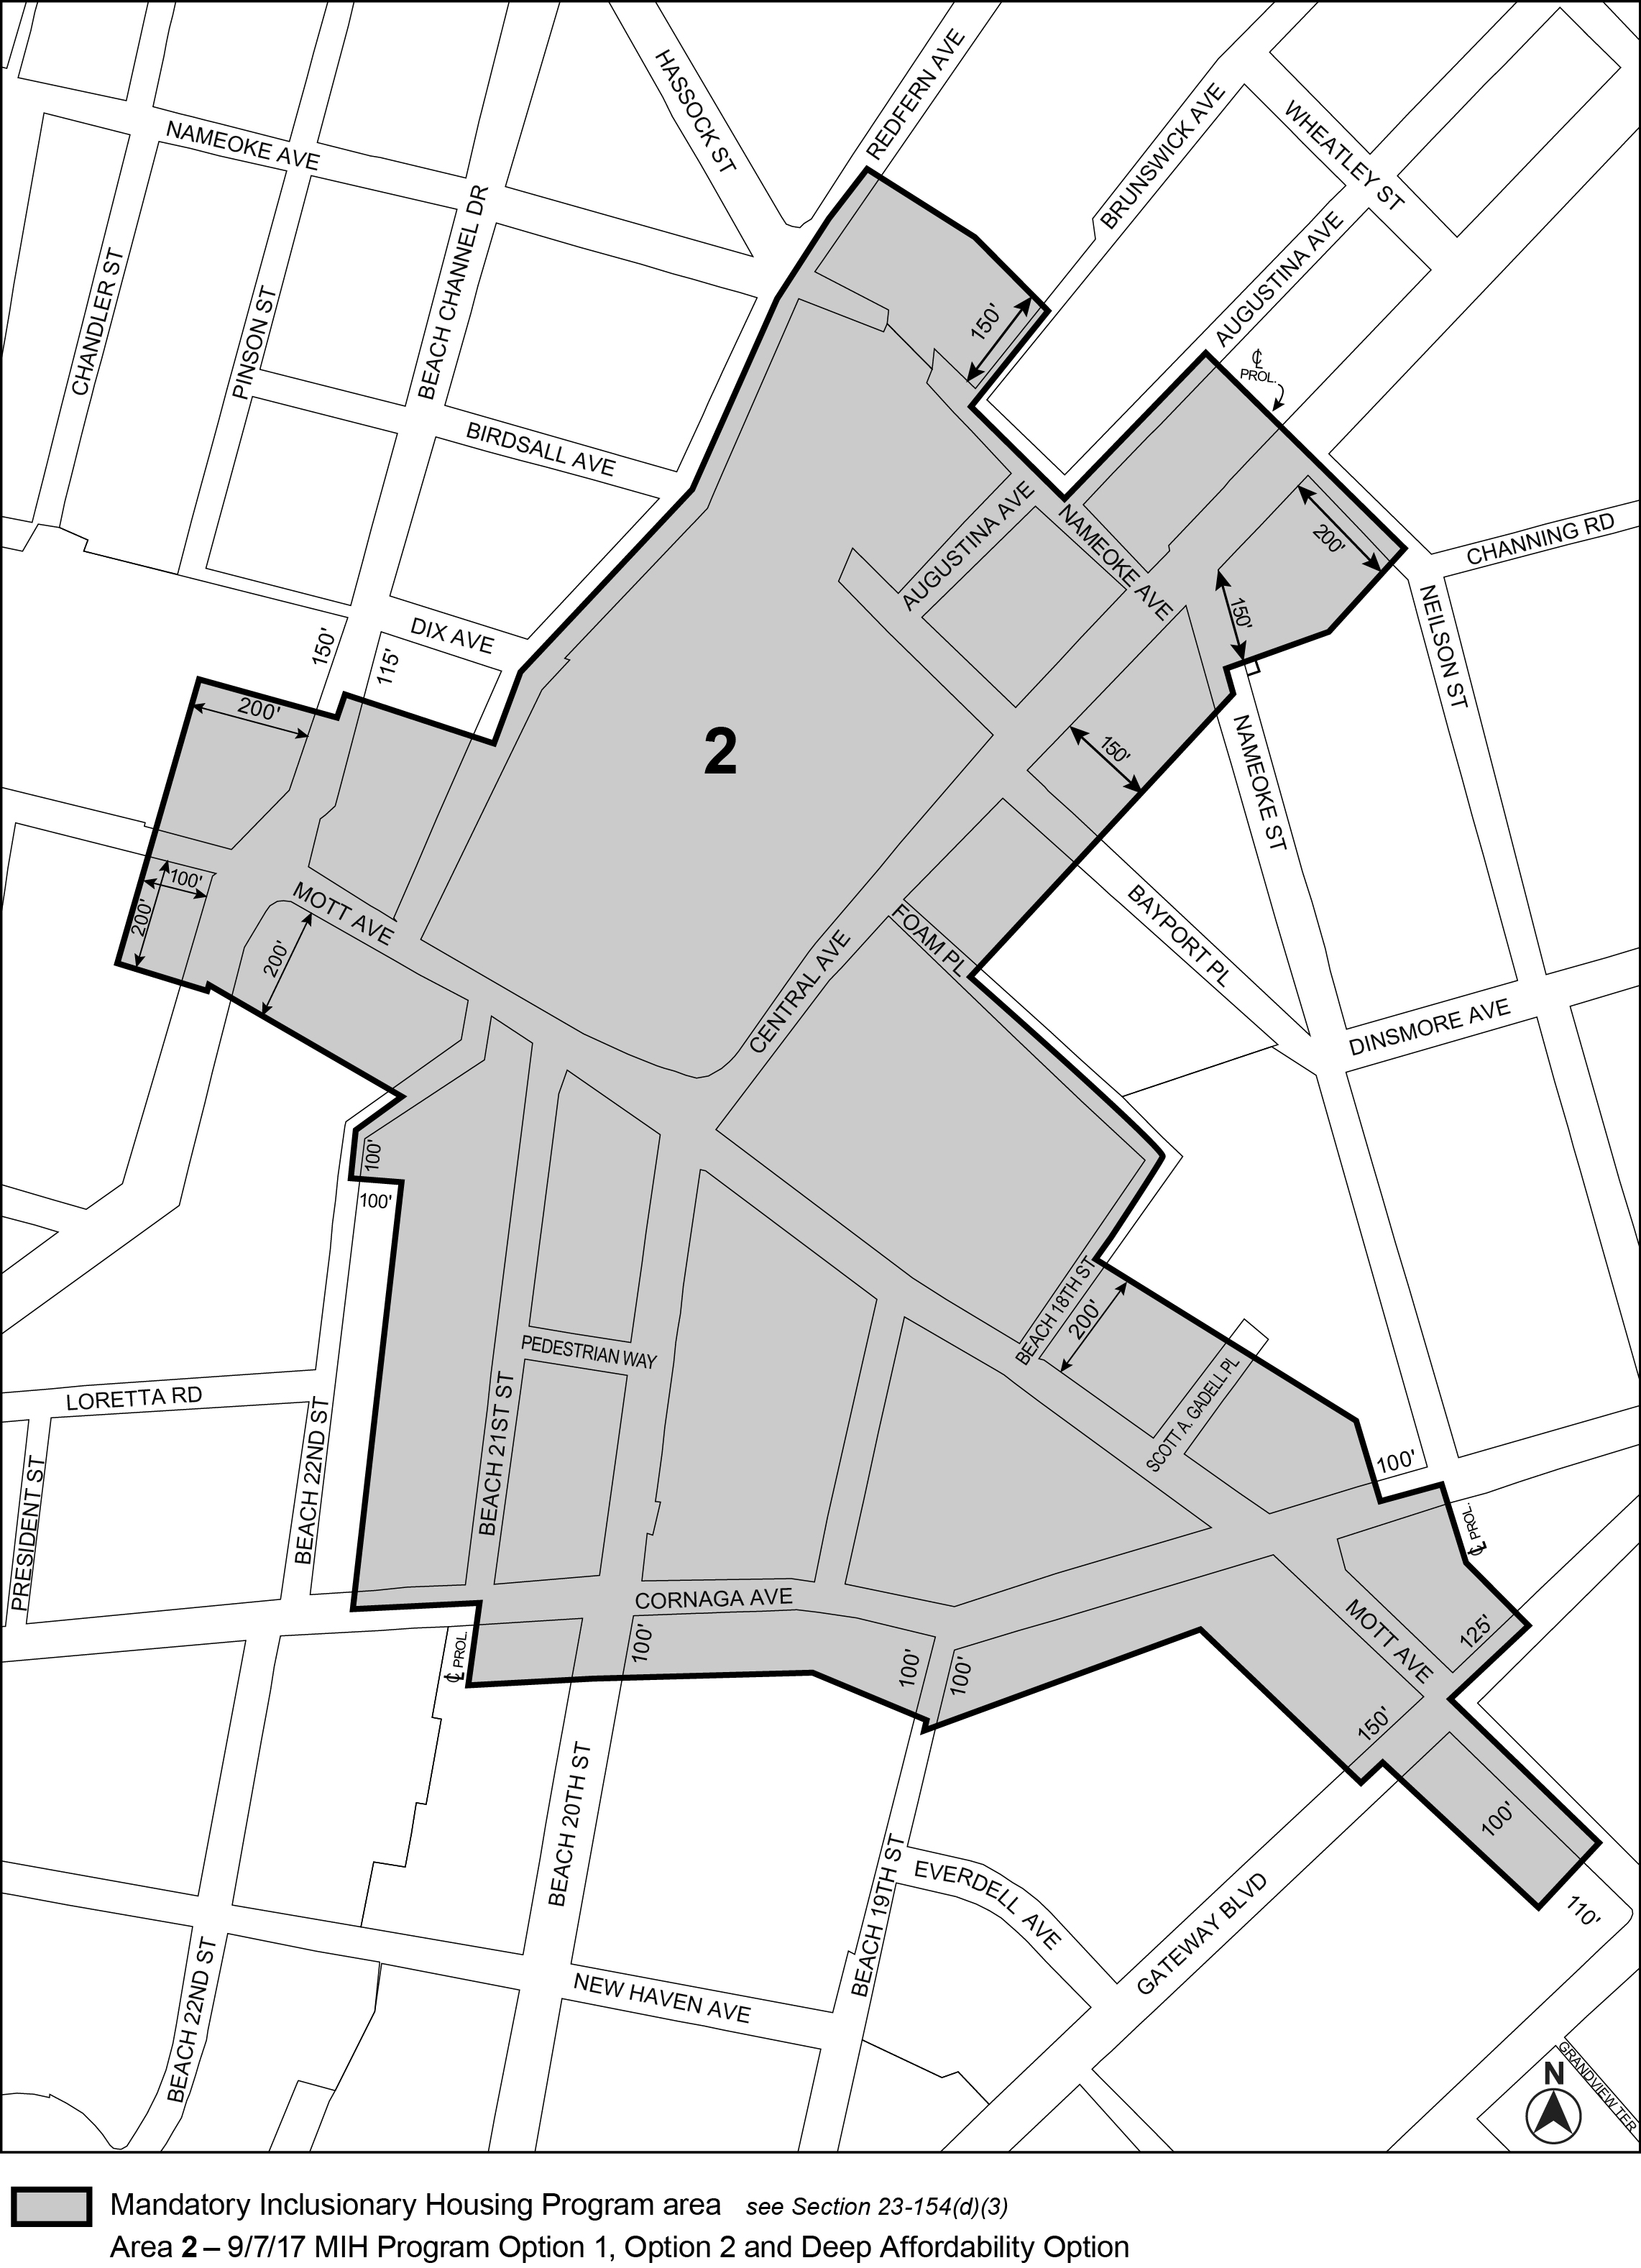 APPENDIX F, Queens CD 14, Map 2, MIH area 2 (Option 1, Option 2, Deep Affordability Option ) added per Downtown Far Rockaway Development Plan (a.k.a. Special Downtown Far Rockaway District; N 170244(A) ZRQ), adopted 7 September 2017